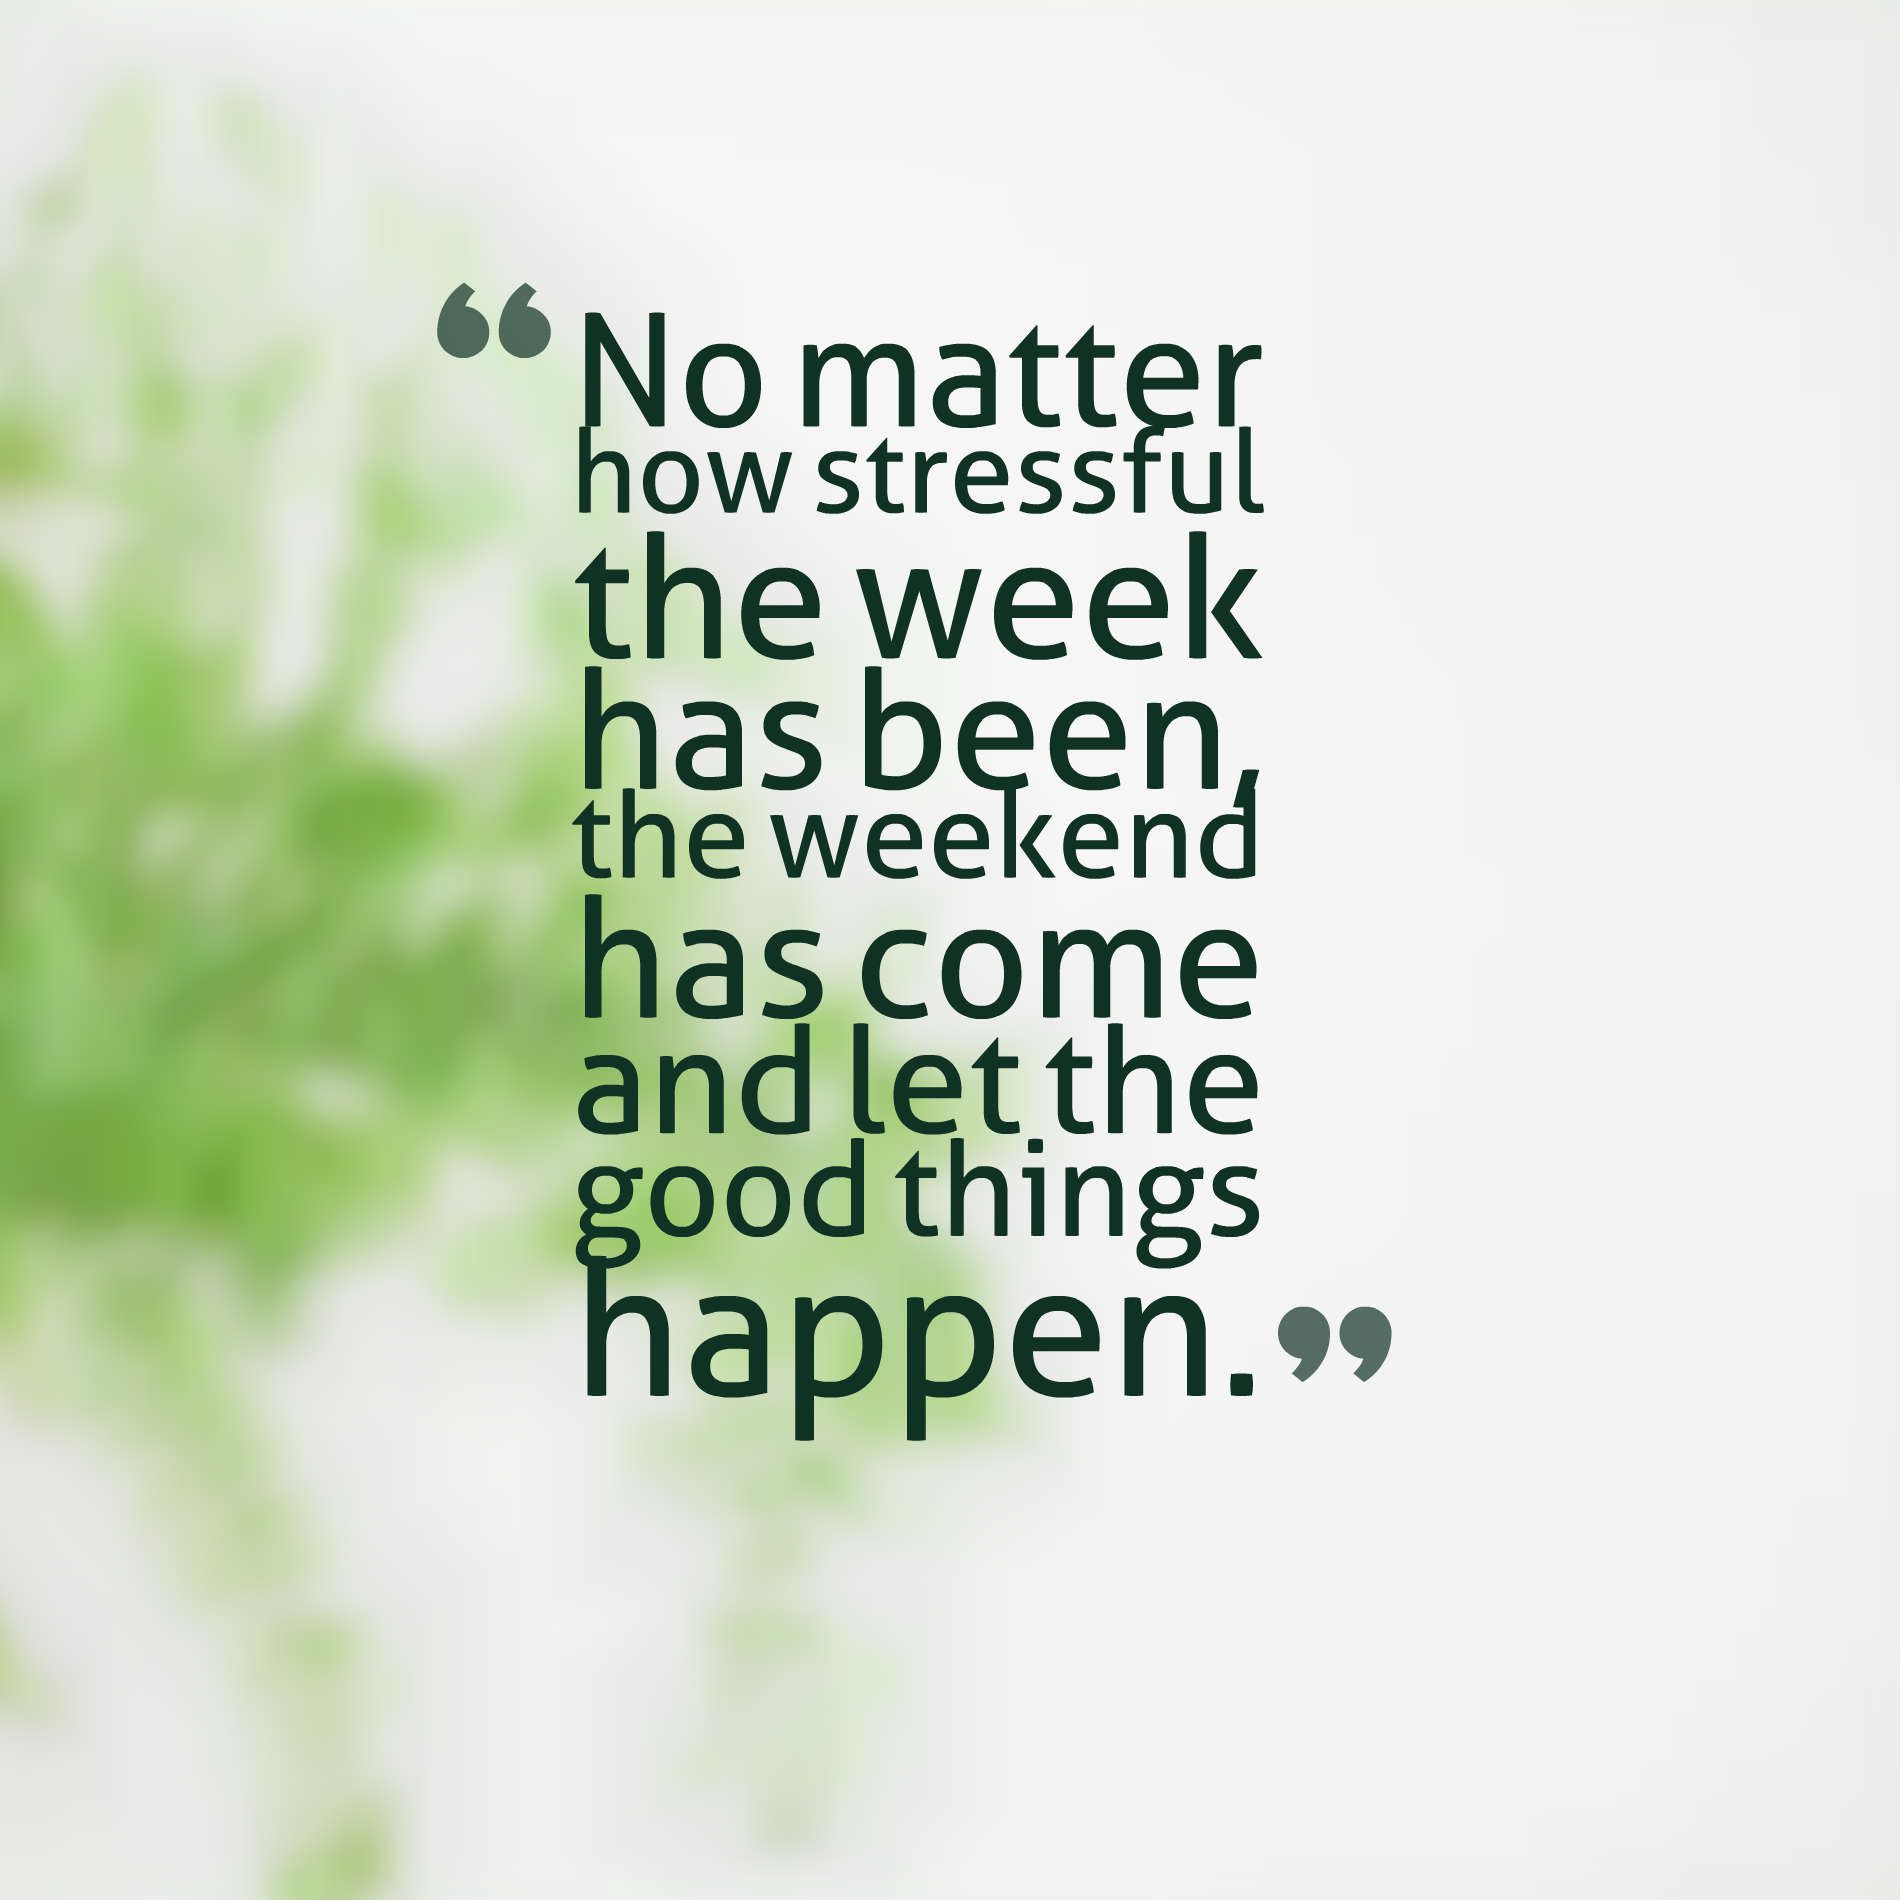 No matter how stressful the week has been, the weekend has come and let the good things happen.